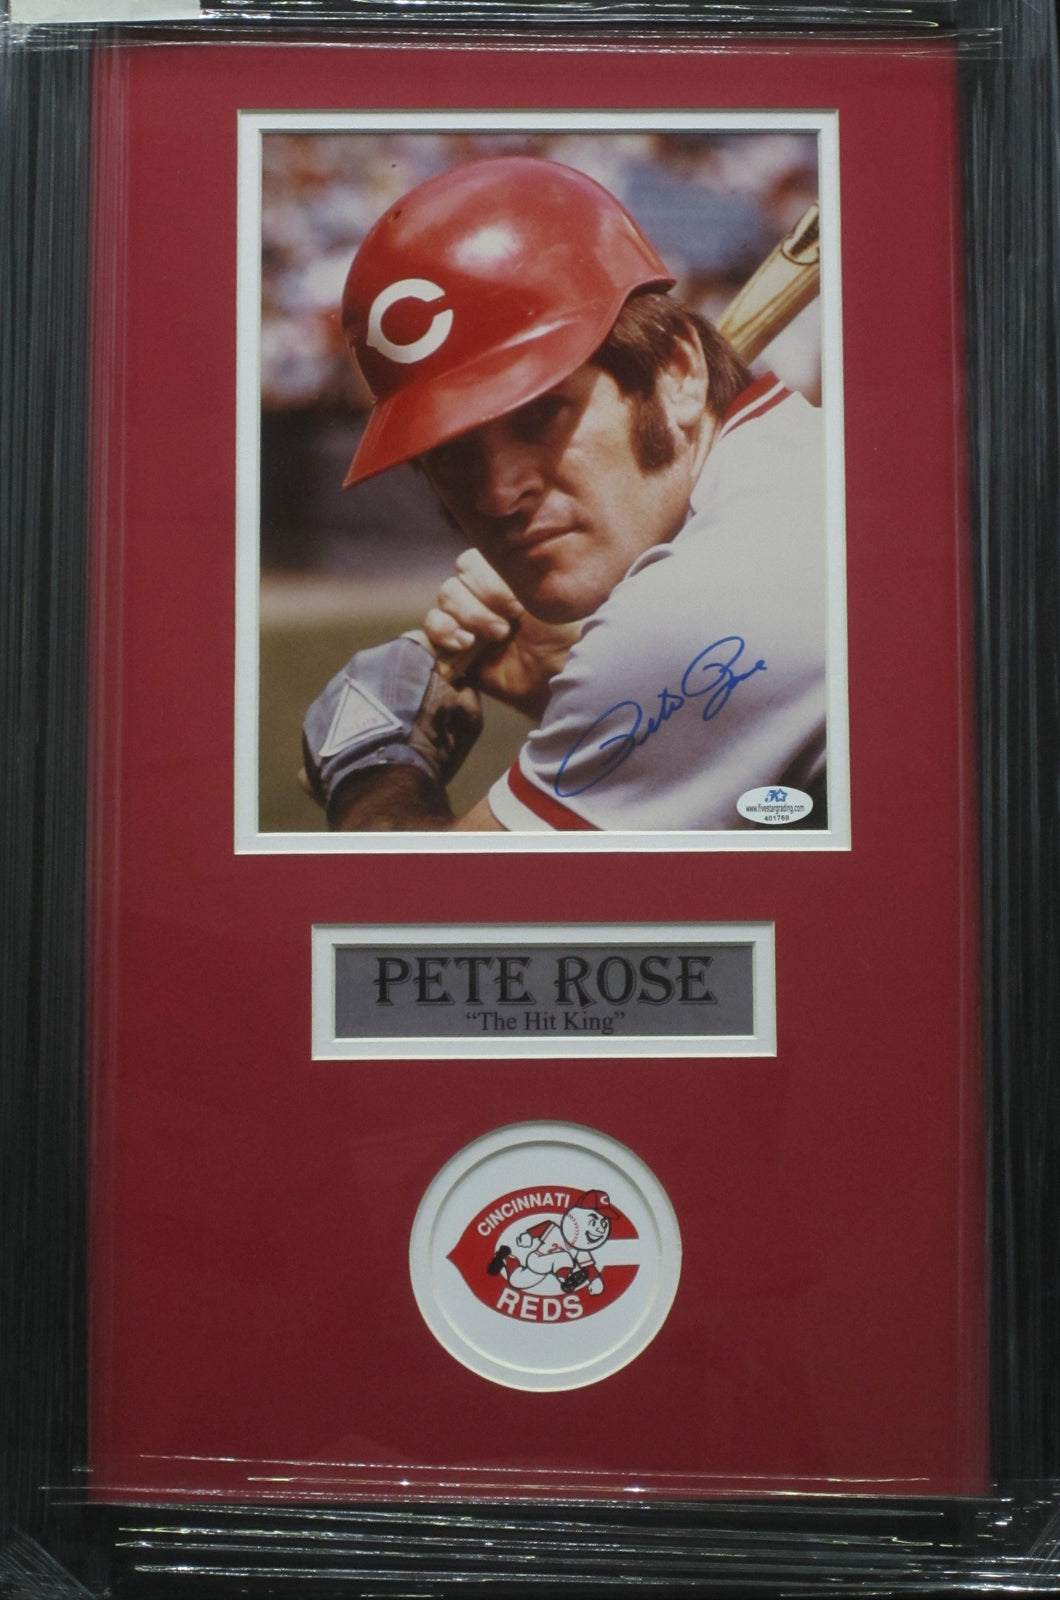 Cincinnati Reds Pete Rose Signed 8x10 Photo Framed & Matted with COA